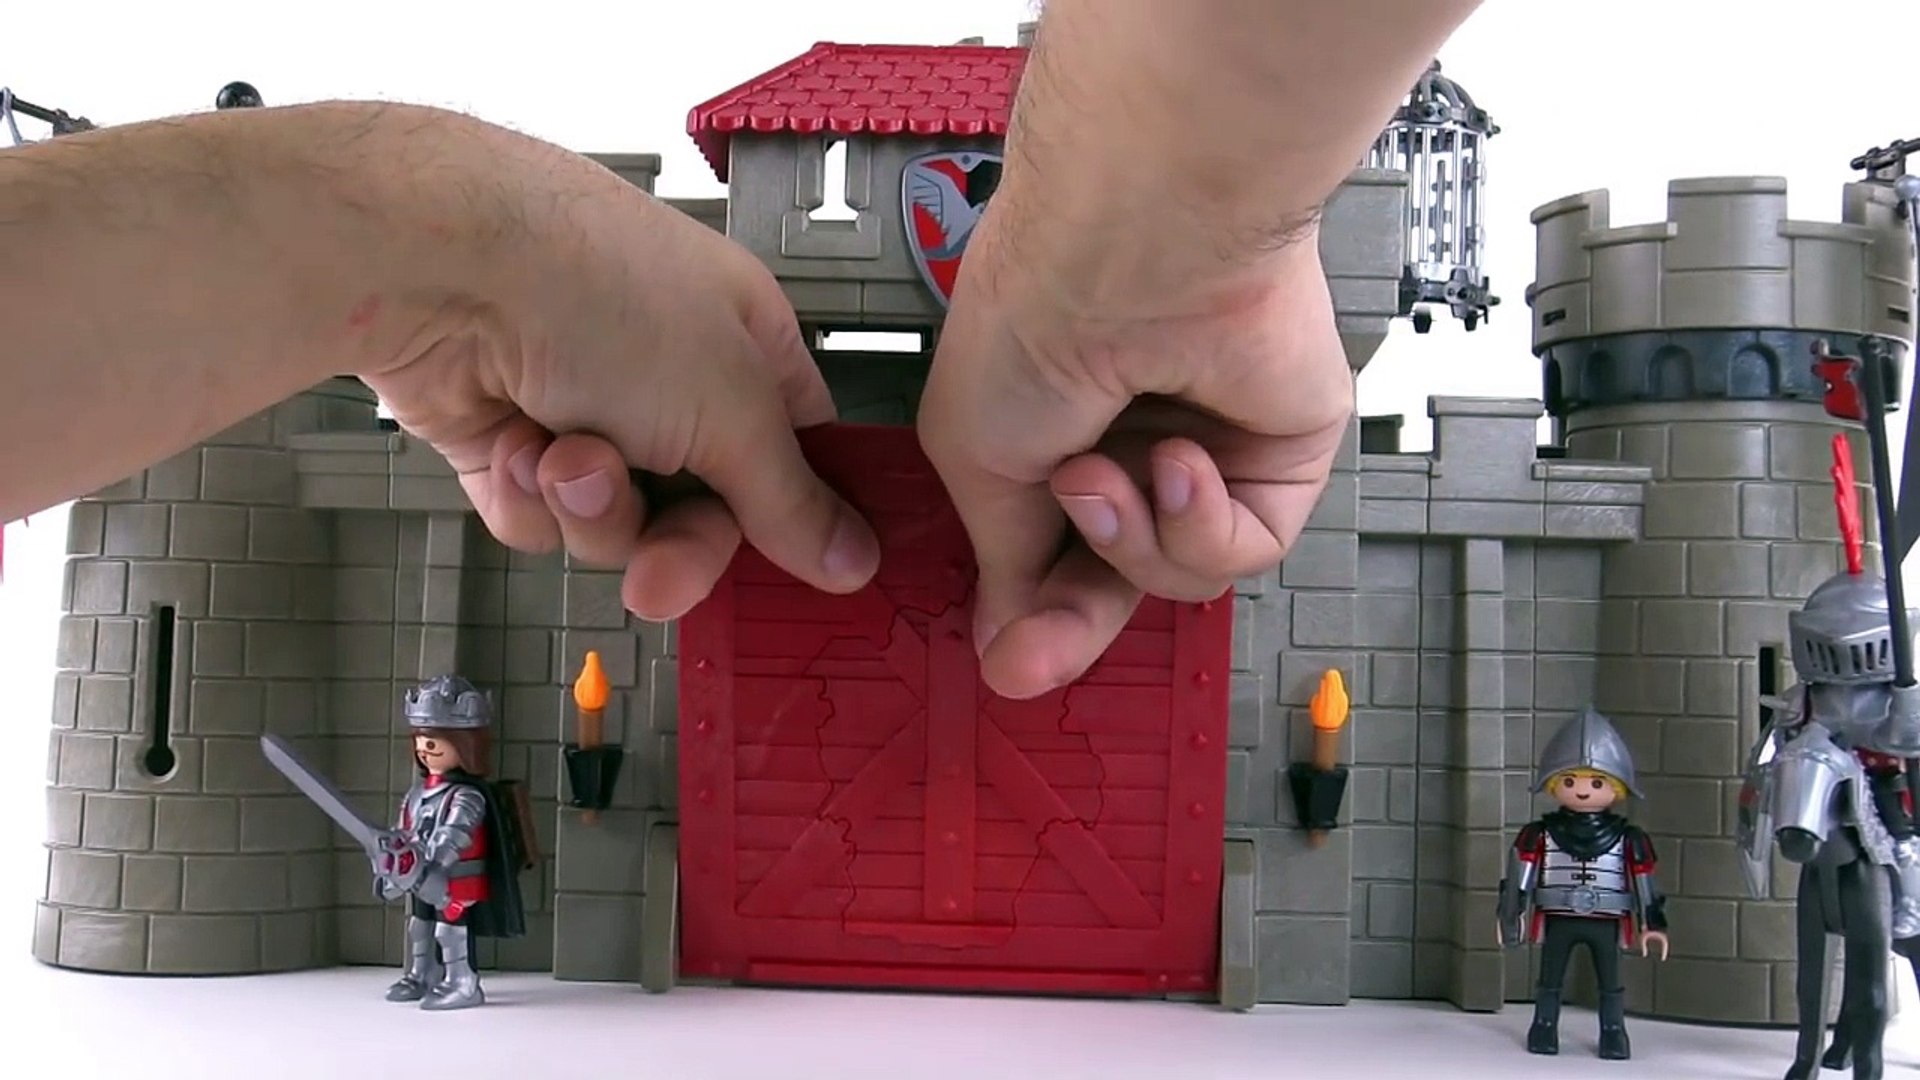 Playmobil new Hawk Knights Castle review! set 6001 - video Dailymotion